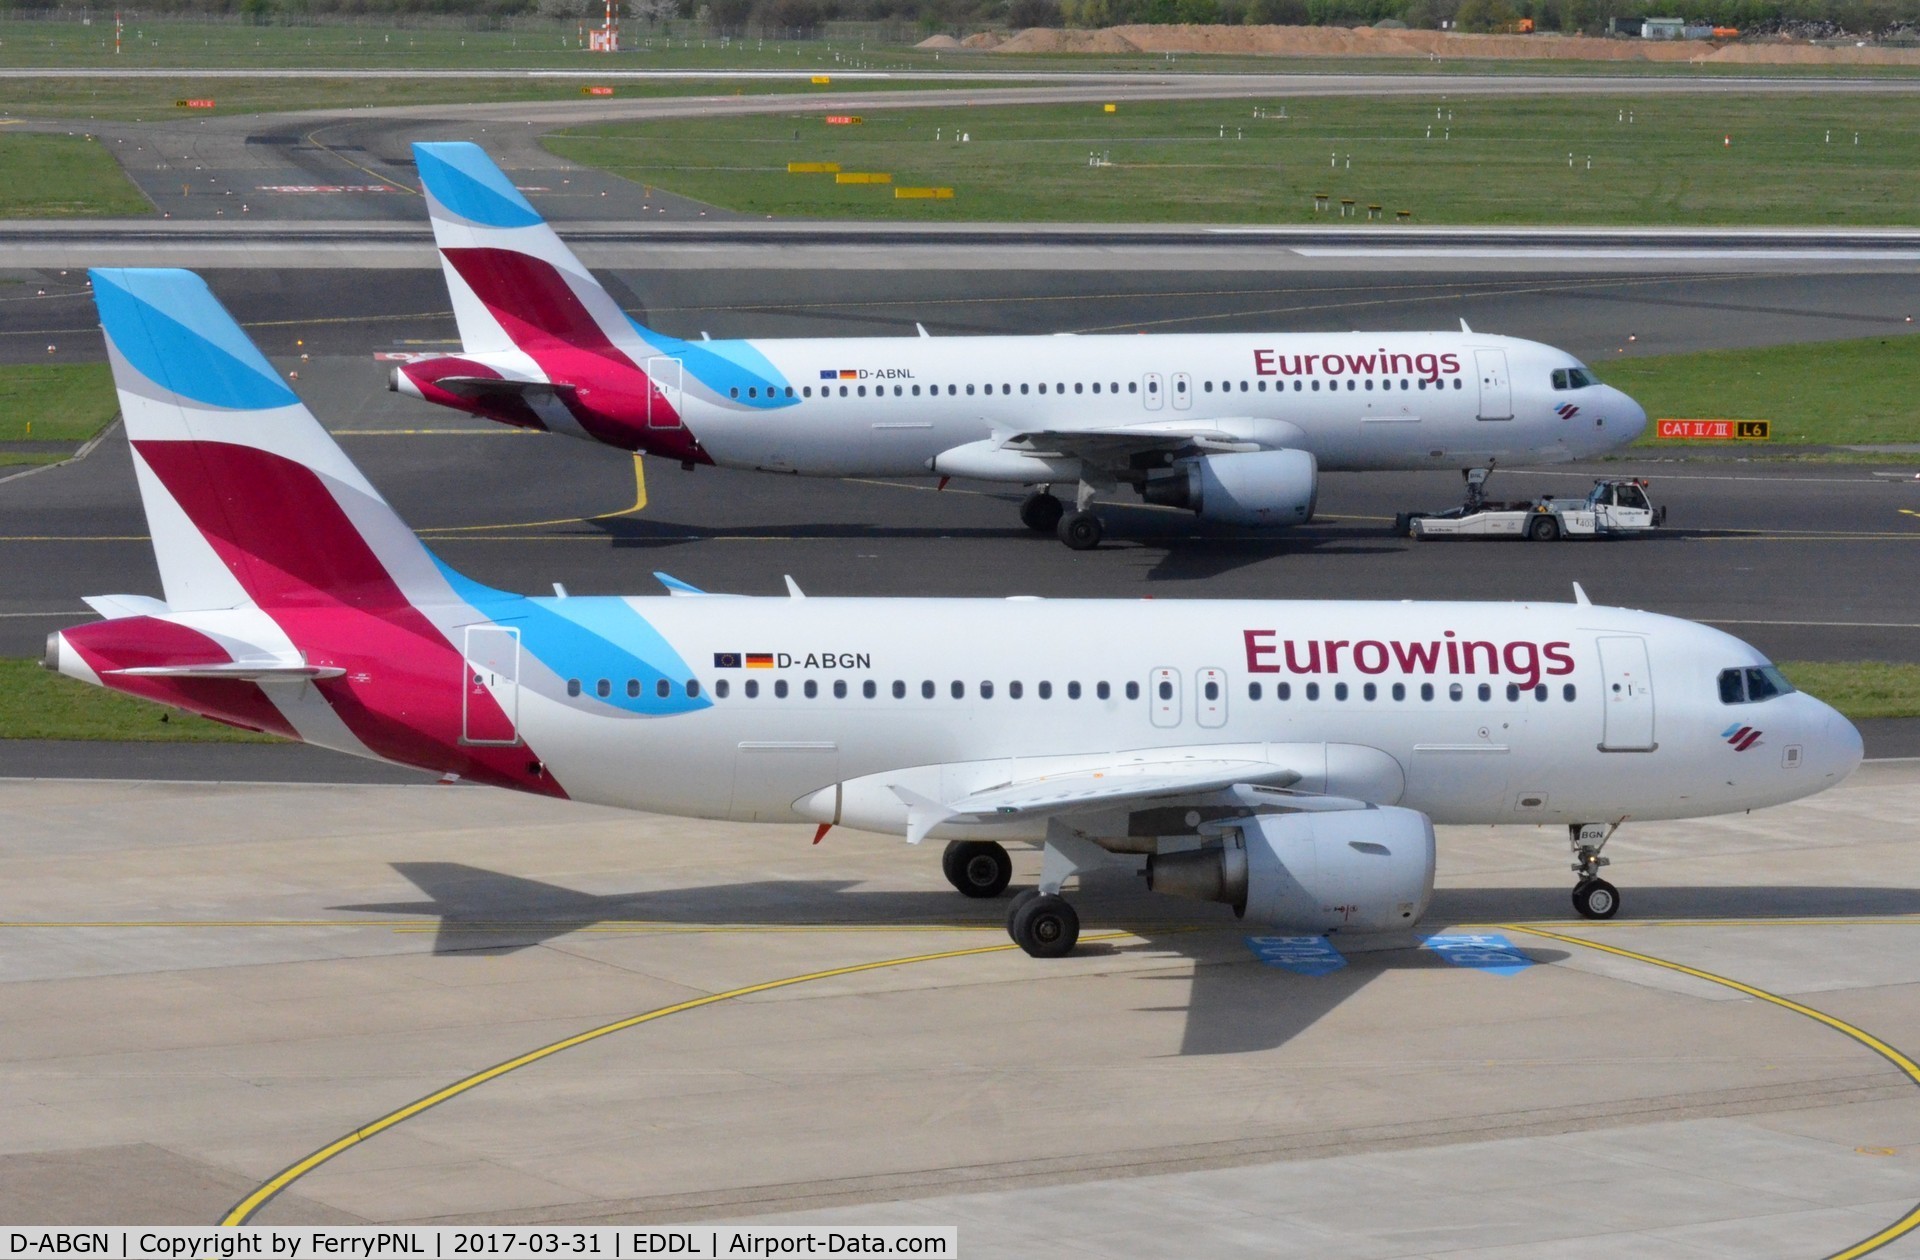 D-ABGN, 2008 Airbus A319-112 C/N 3661, Eurowings operates A319 and A320 now. Both are former Air Berlin aircraft.